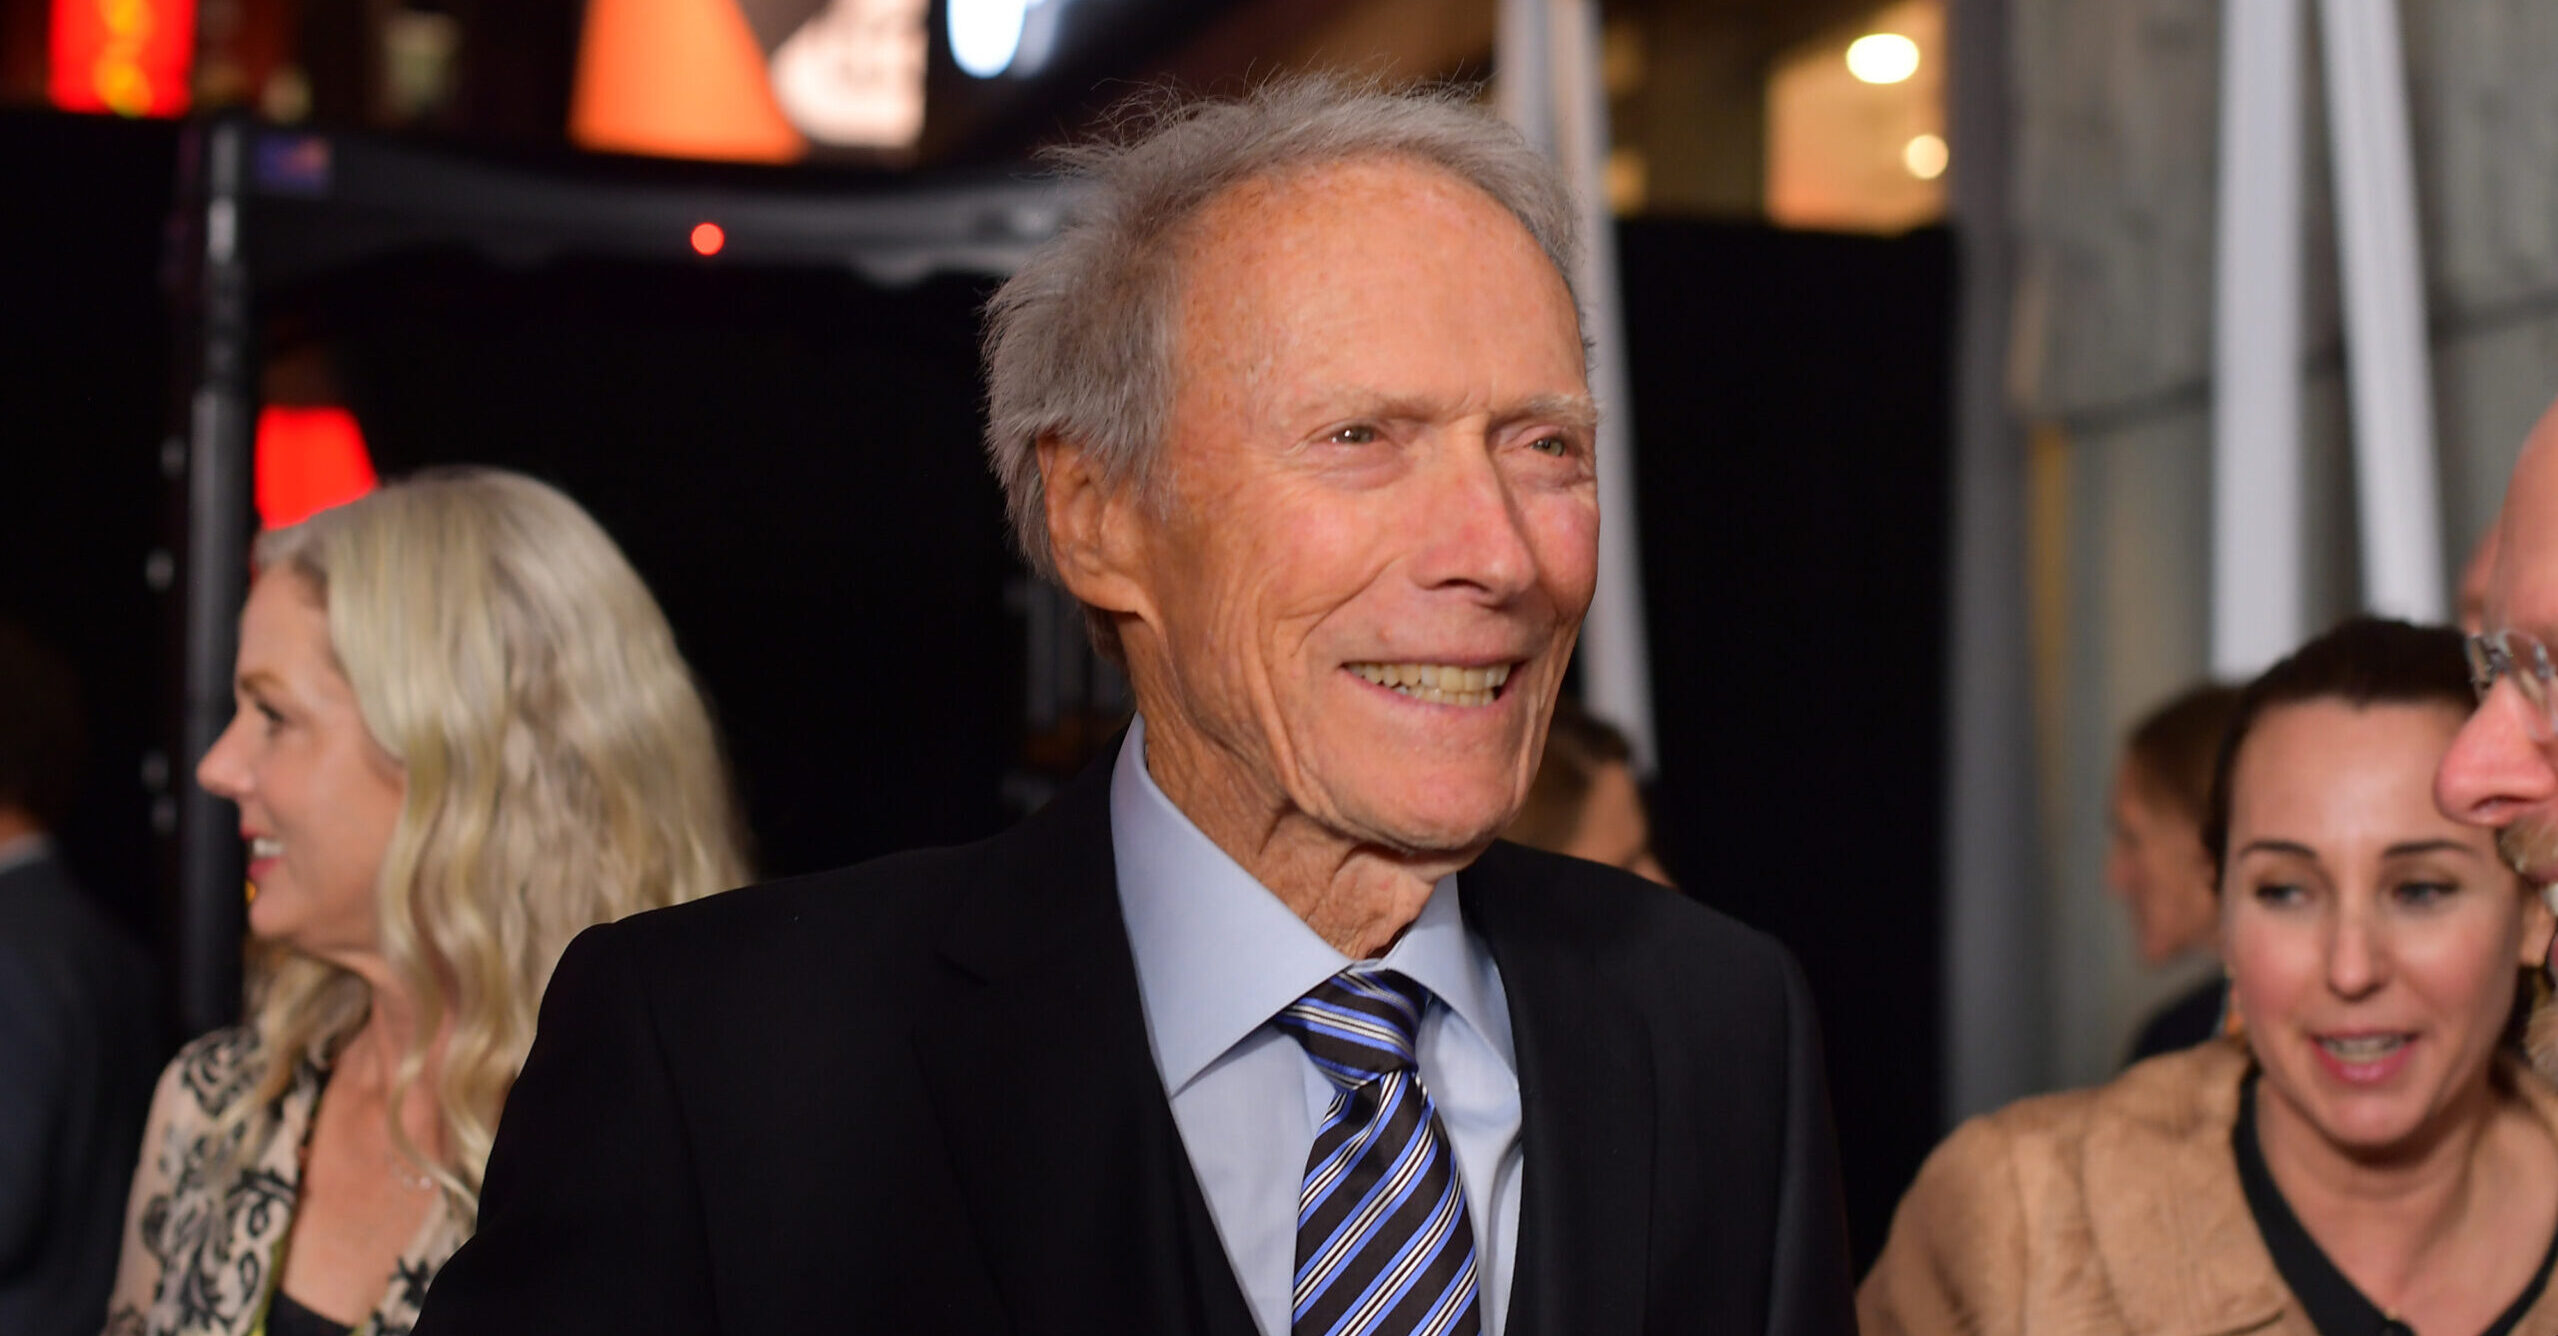 clint eastwood net worth left his family in tears